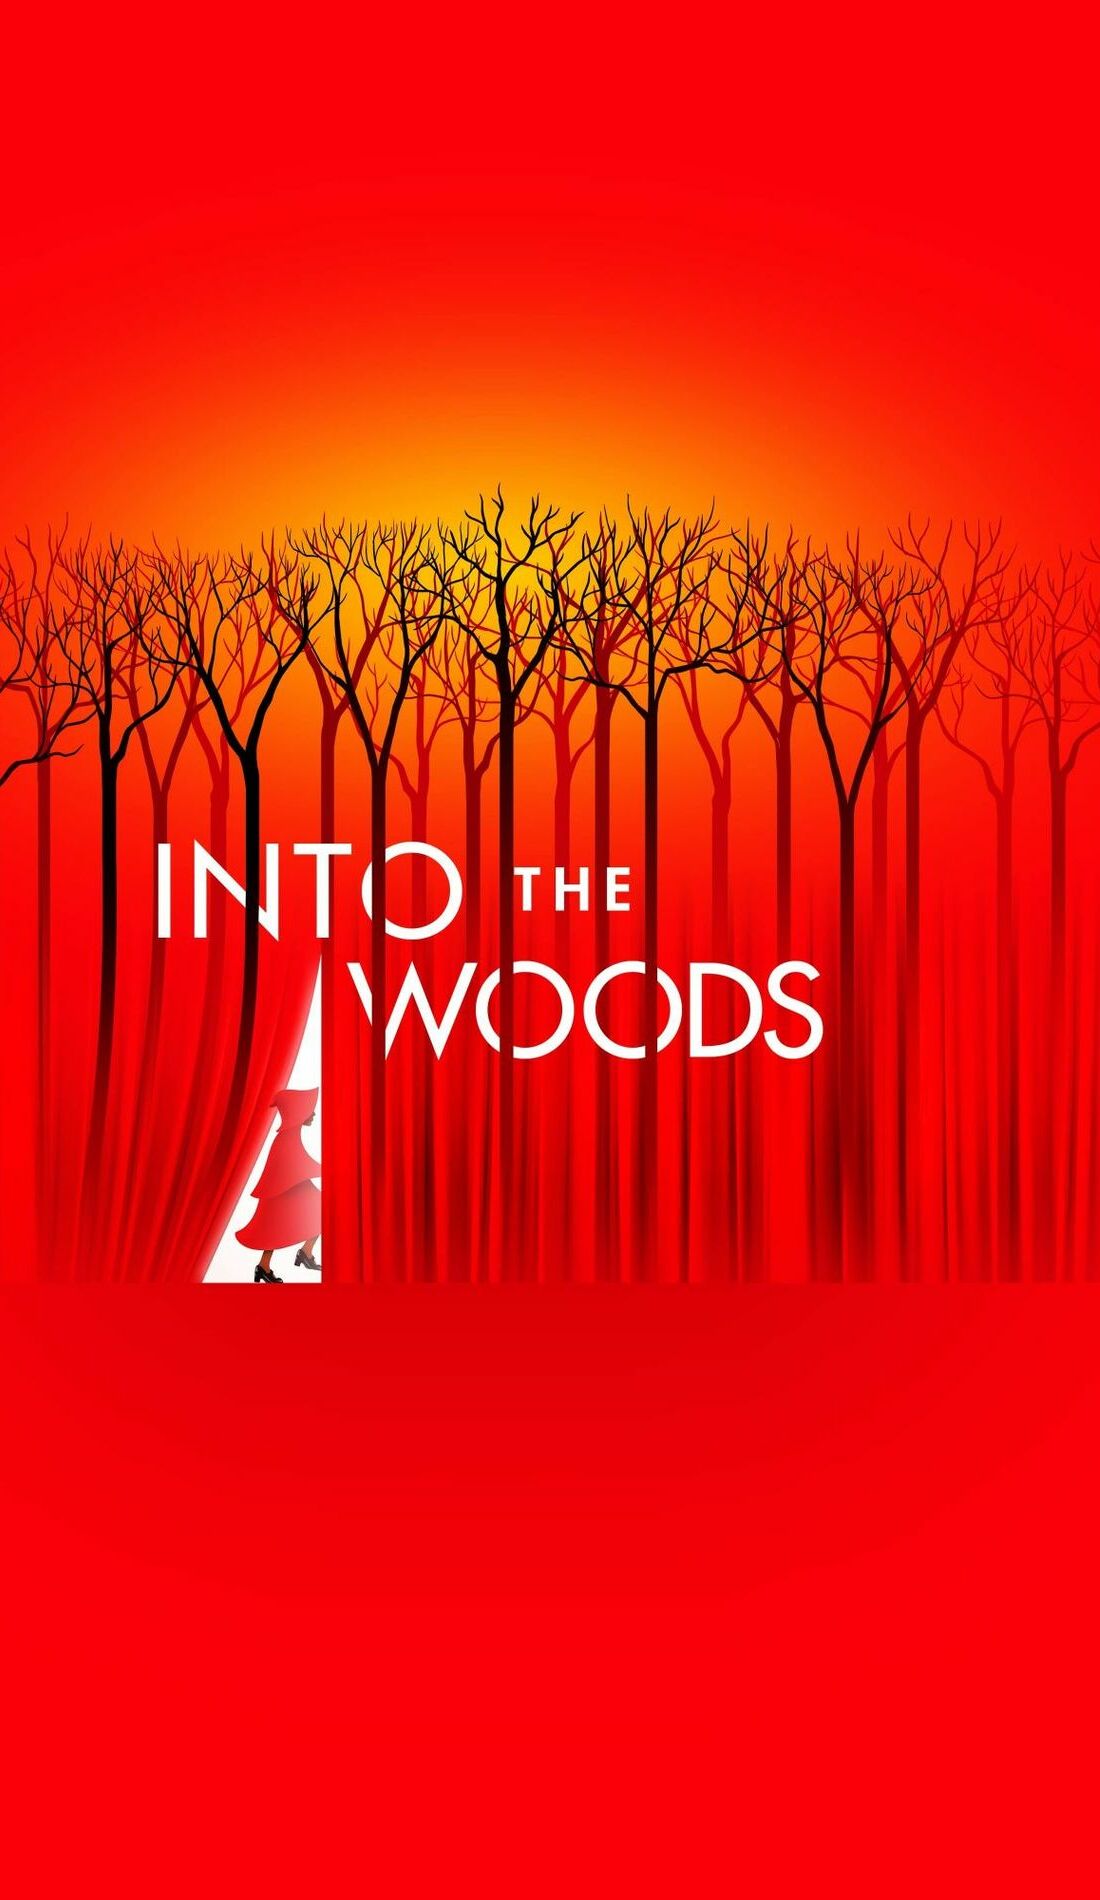 A Into the Woods live event